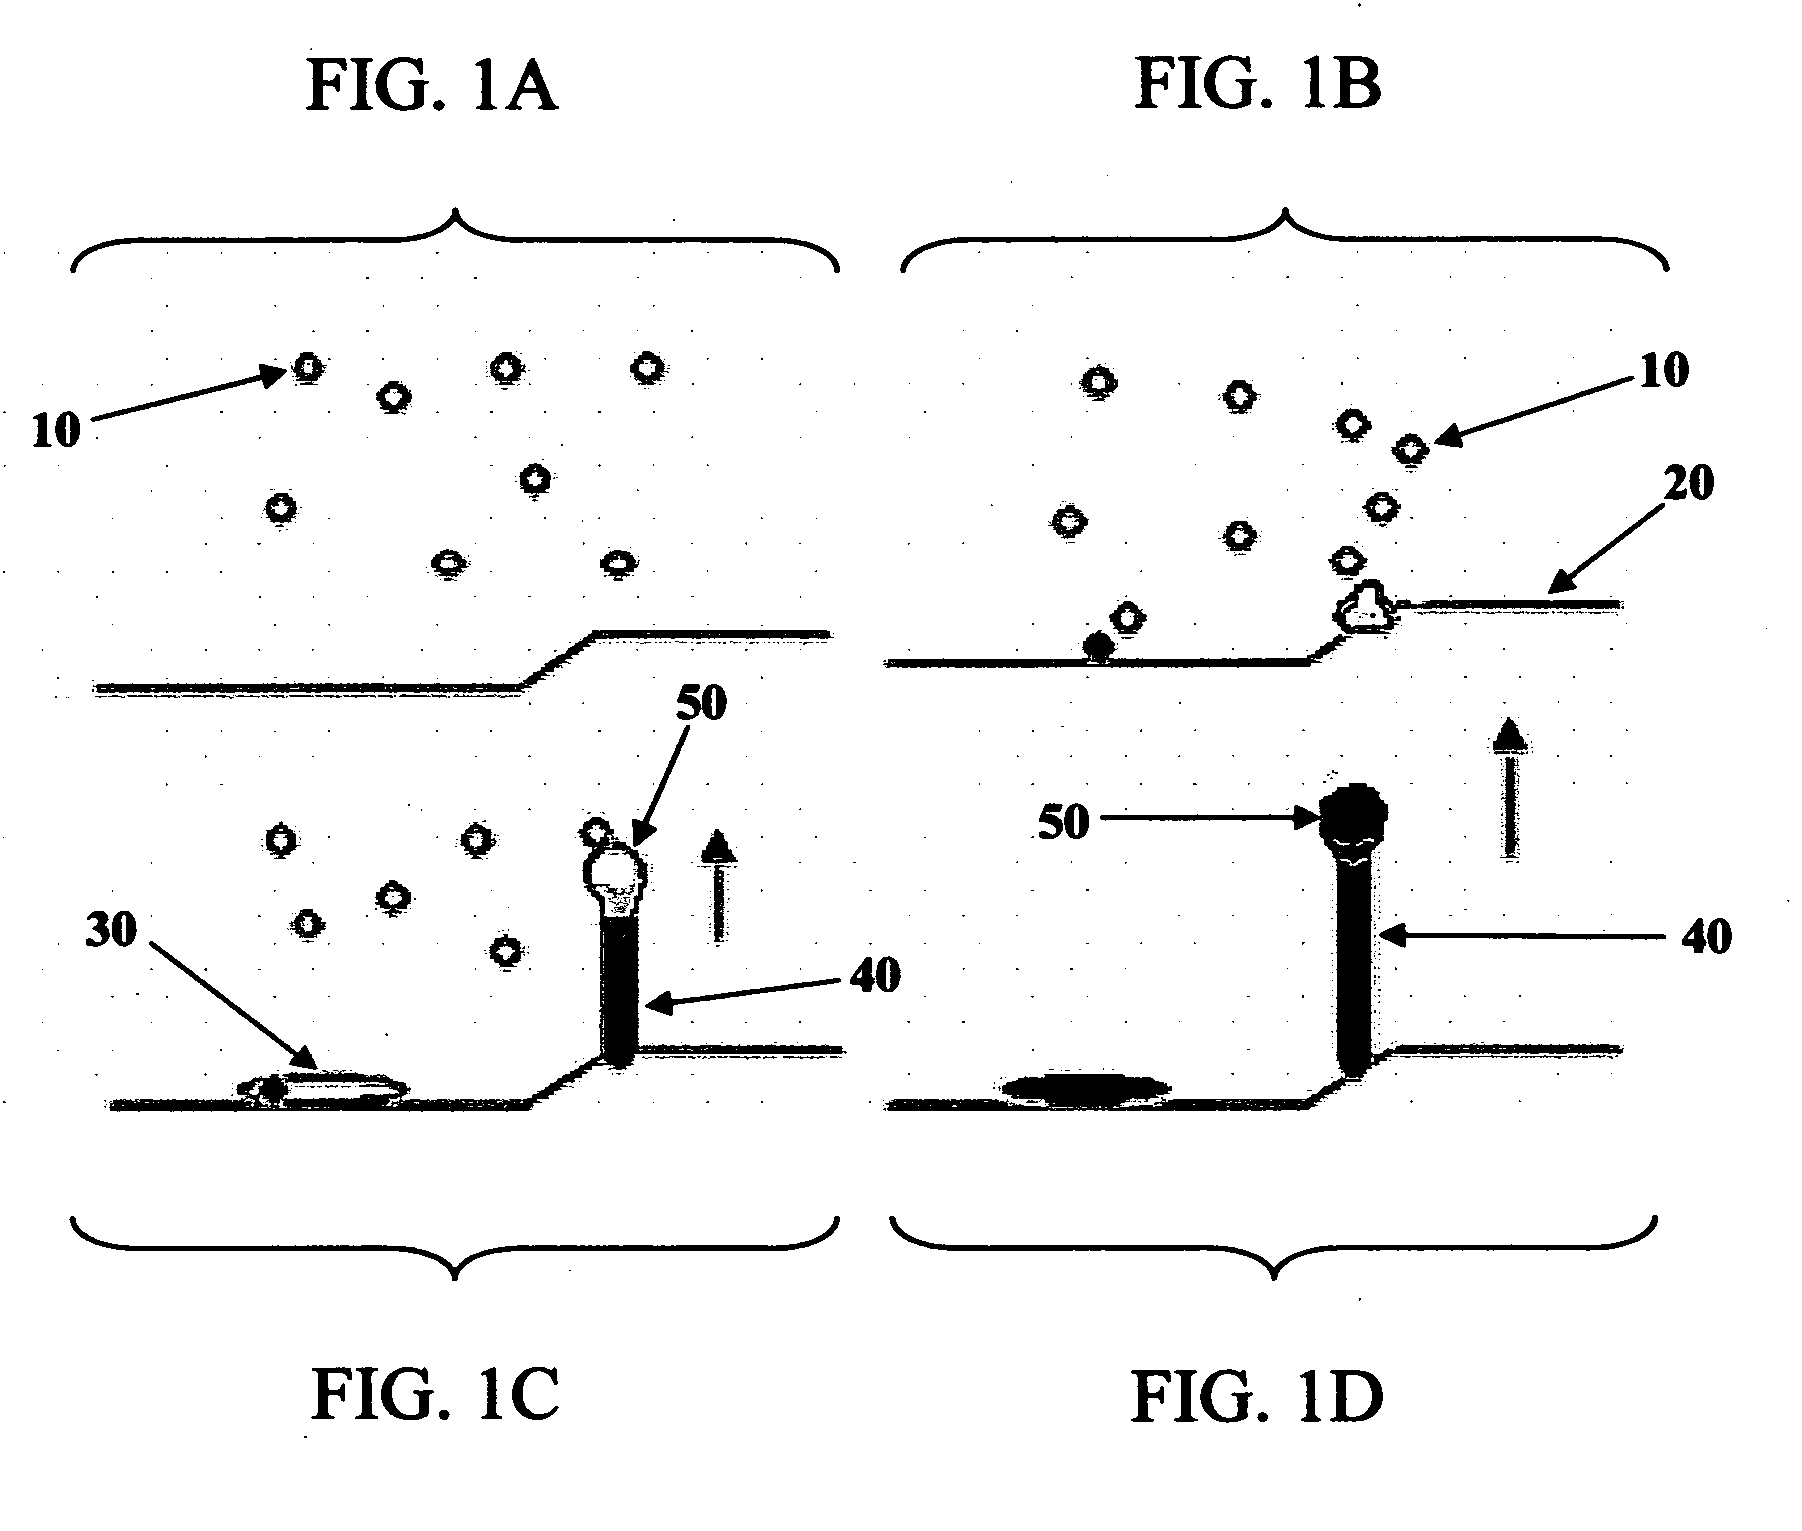 Fibrous minerals, methods for their production using a solution-precursor-solid mechanism, and methods of use